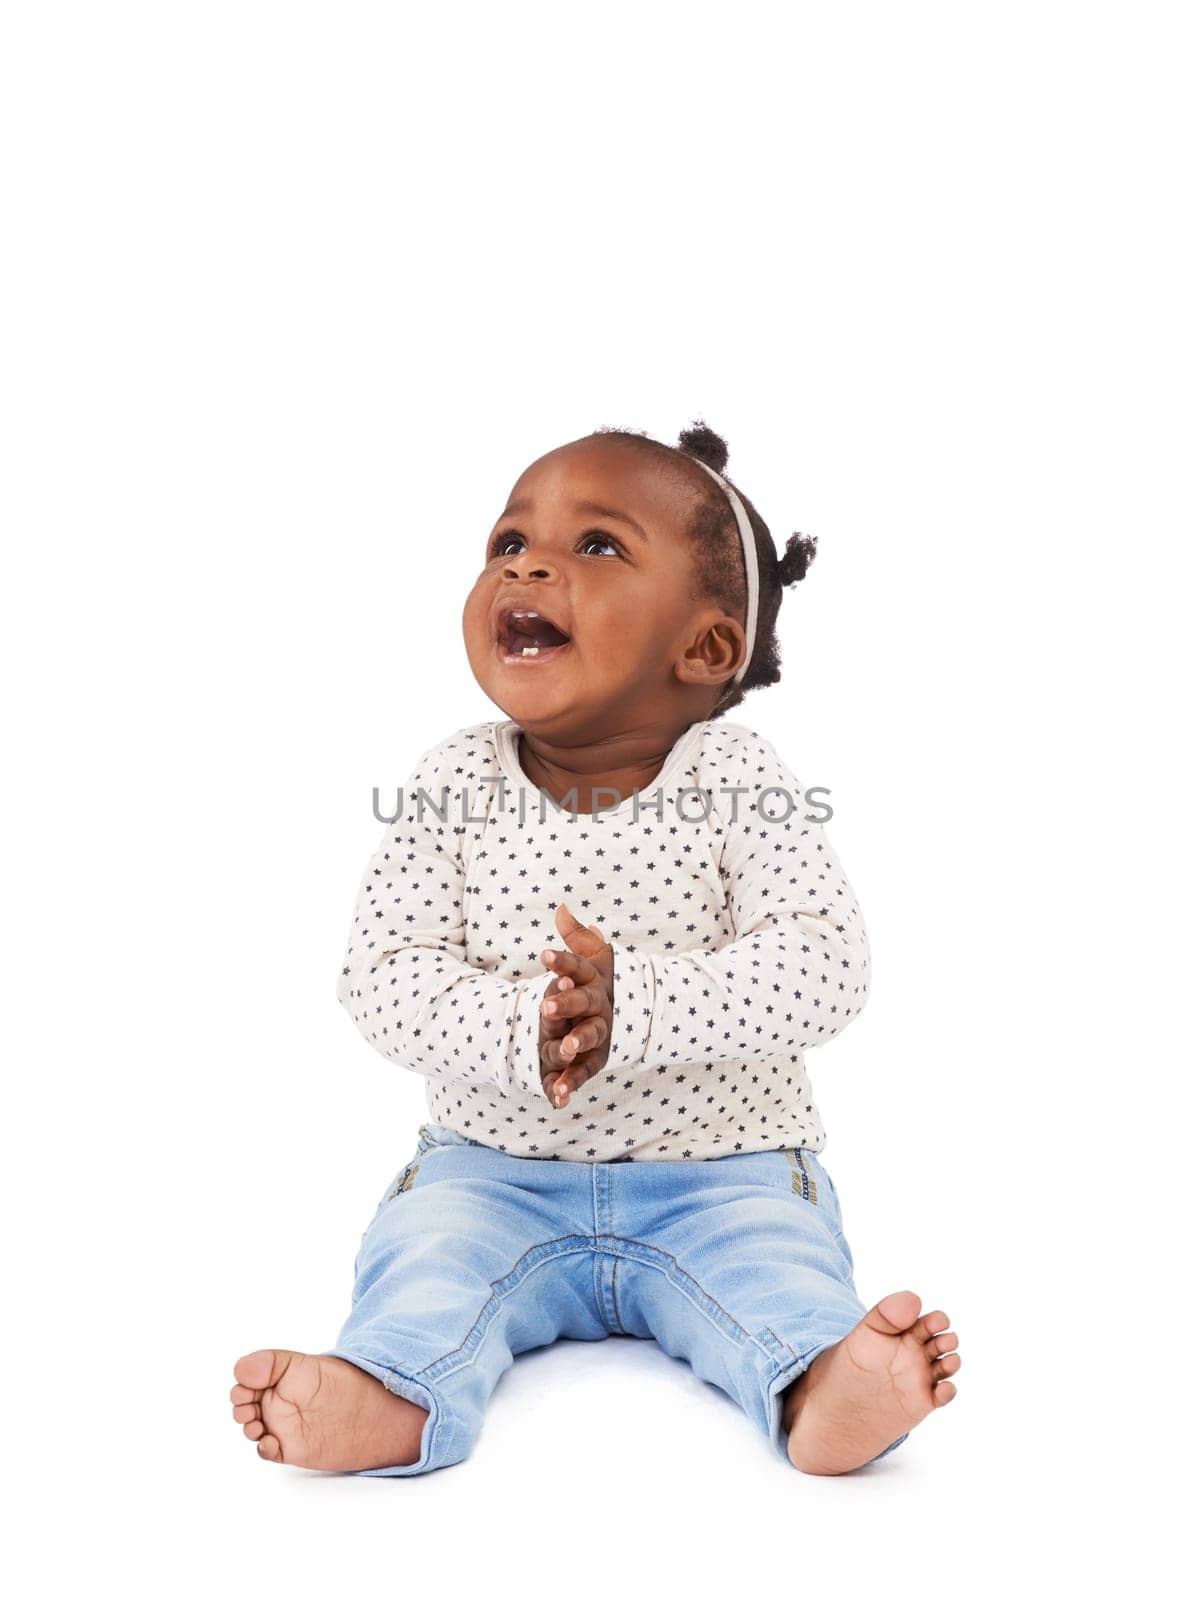 Baby girl, playing and clapping with smile in studio for applause, fun and cheerful on white background. Child, learning and motor skills for childhood development, excited and happy kid or infant.